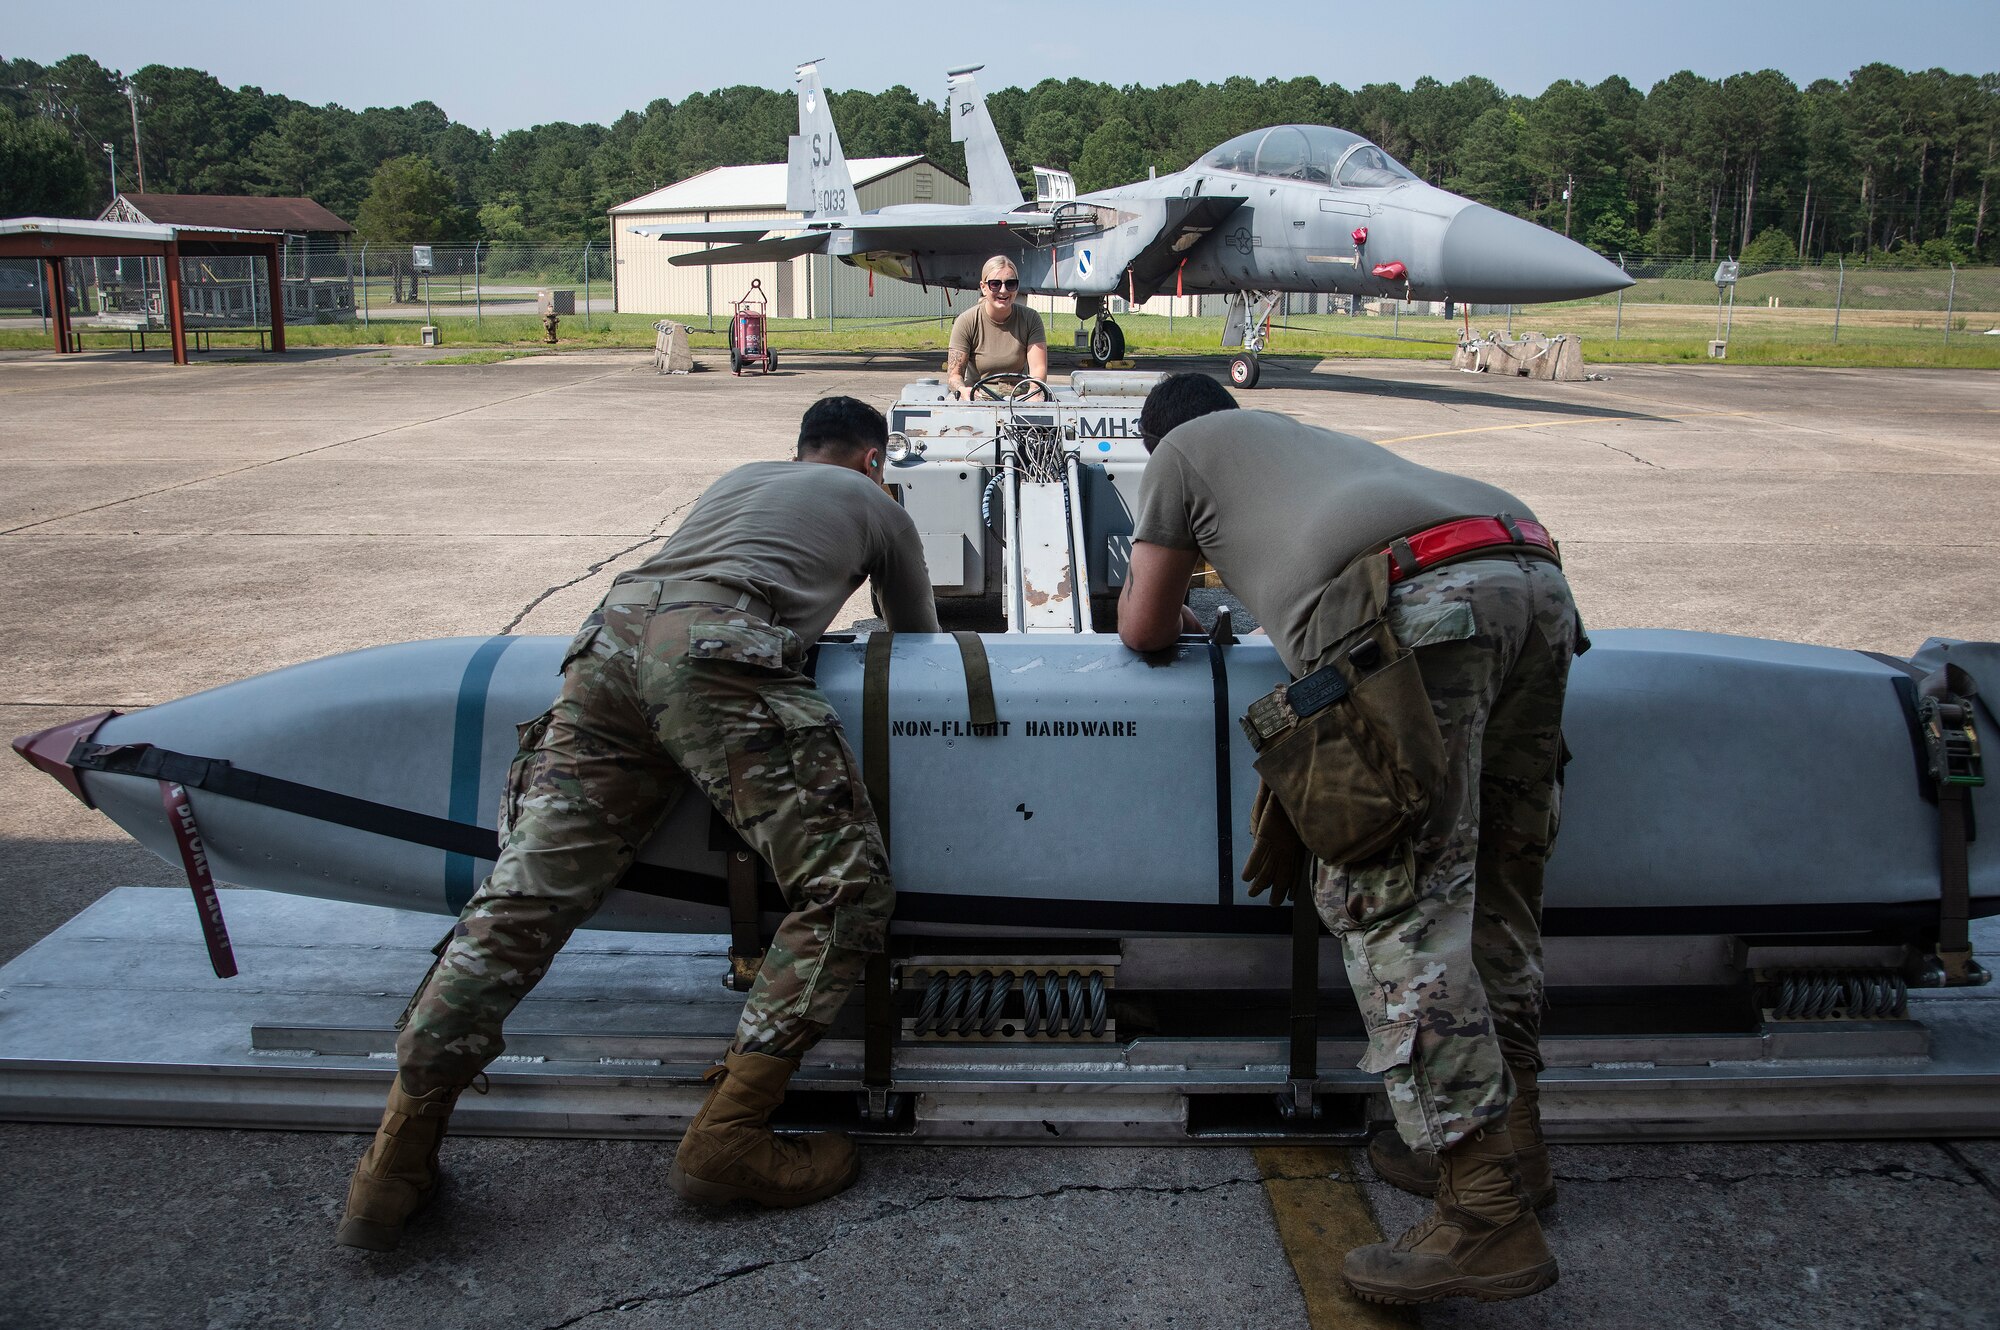 Senior Airman Kaylee Hanson, center, and Staff Sgt. Alexandro Diaz, left, 4th Maintenance Group loading standardization crew members, work alongside Staff Sgt. Miguel Jiminez Flores, 336th Fighter Generation squadron weapons load crew chief, to strap down an unarmed practice [AGM-158 JASSM] munition.